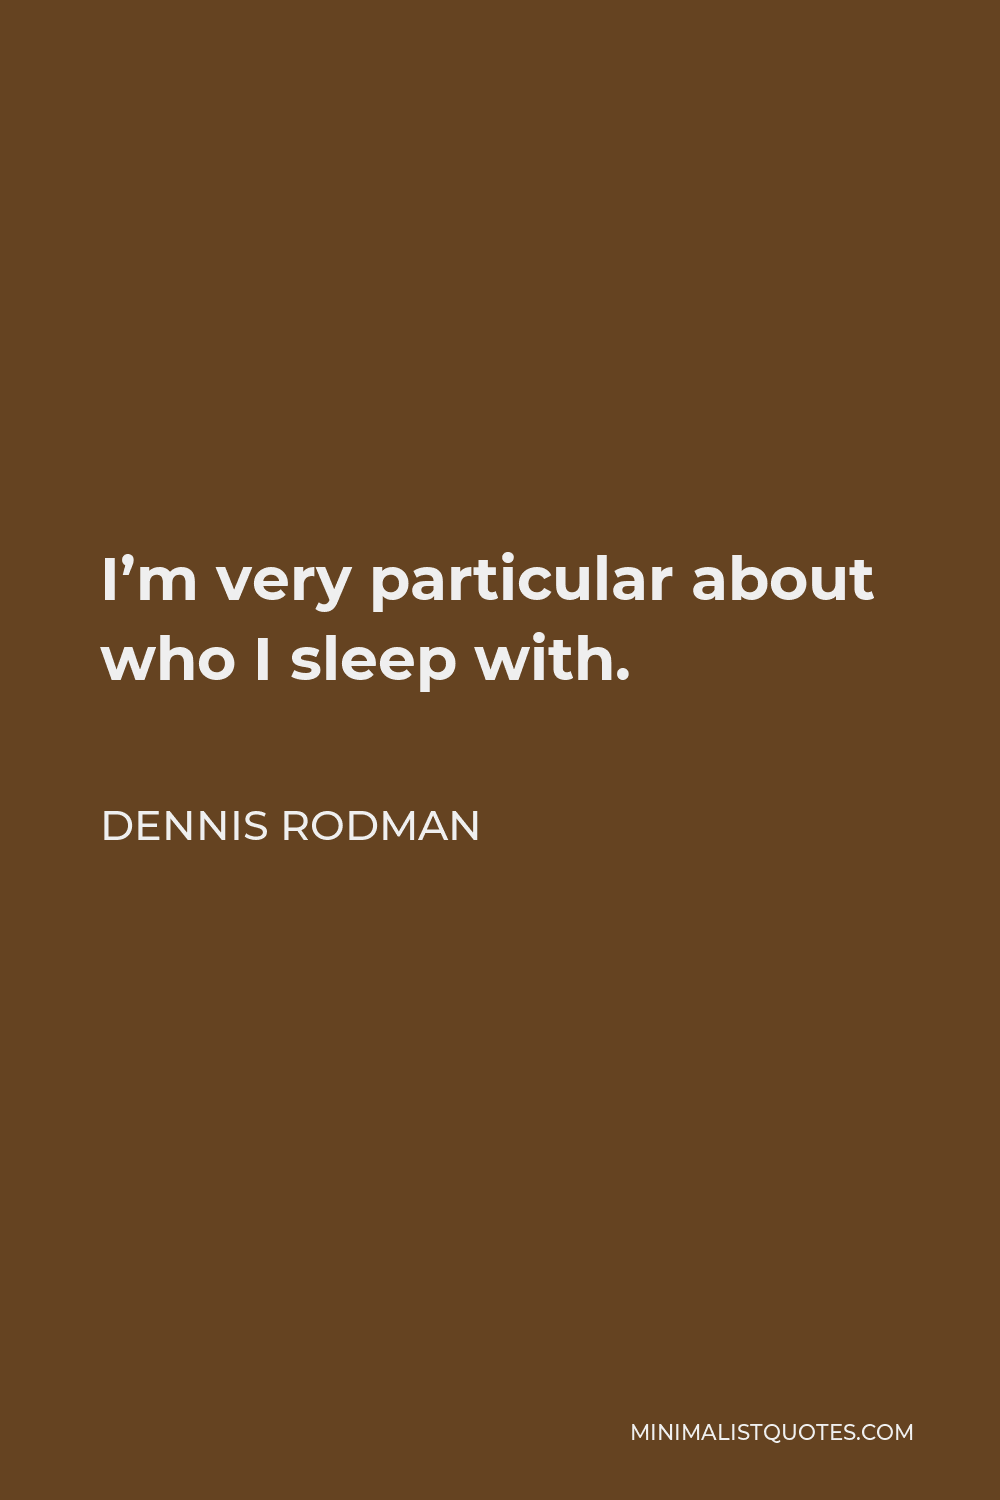 Dennis Rodman Quote - I’m very particular about who I sleep with.